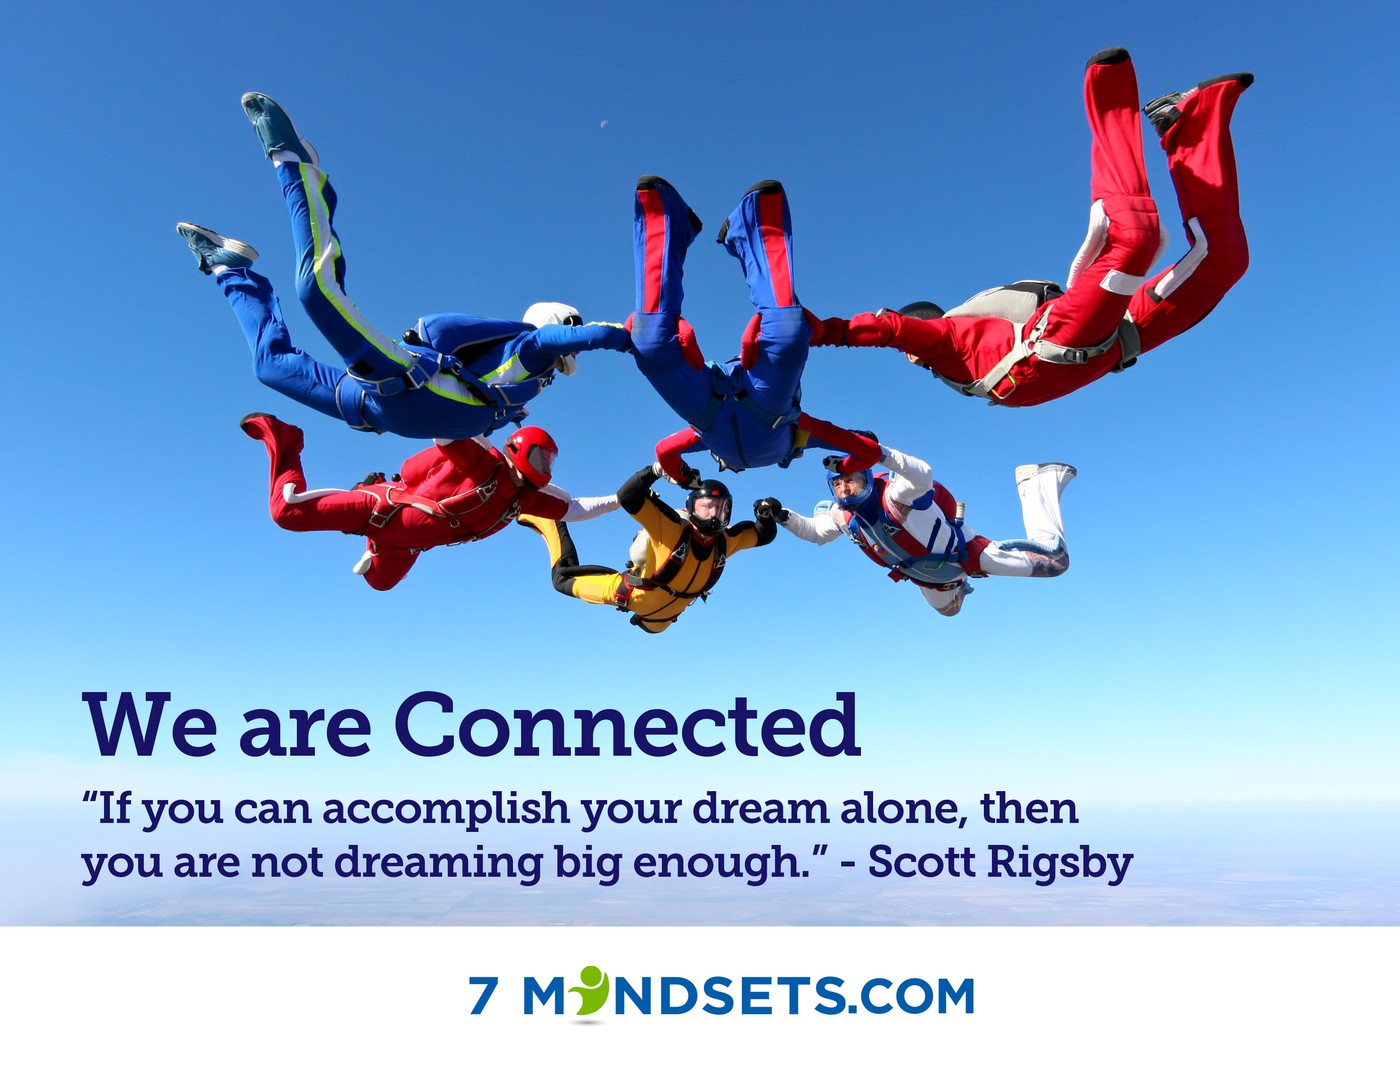 We are Connected. "If you can accomplish your dream alone, then you are not dreaming big enough." - Scott Rigsby